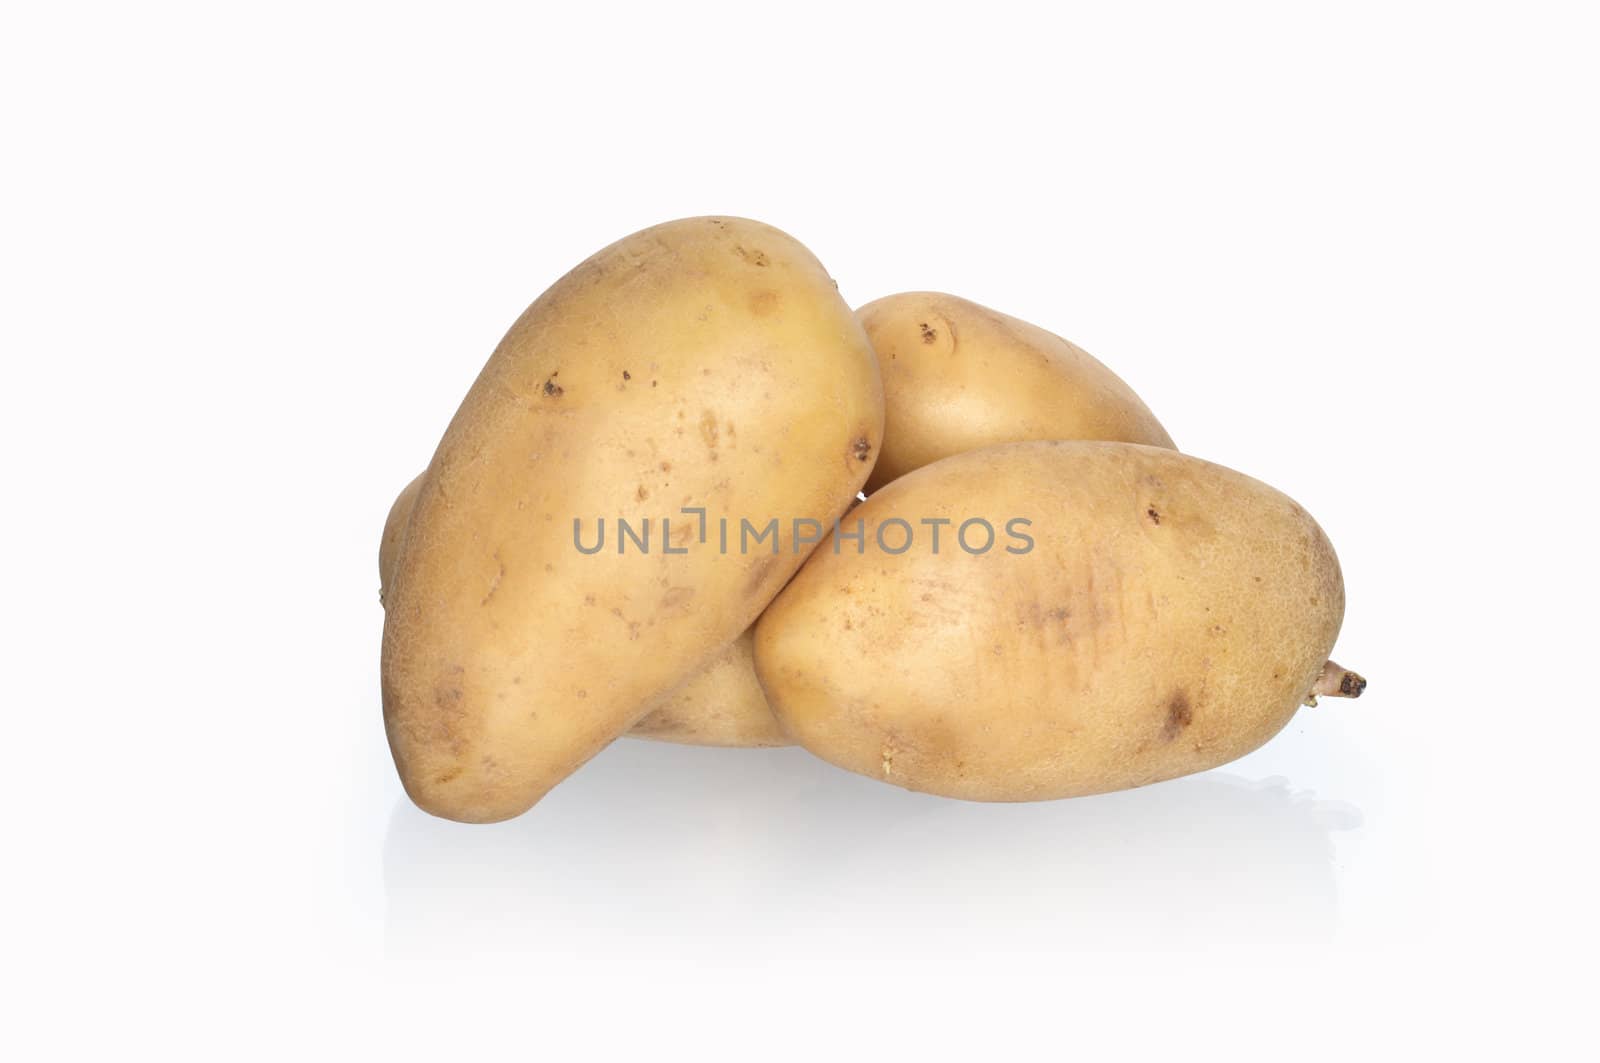 Few raw potatoes isolated on white background with clipping path